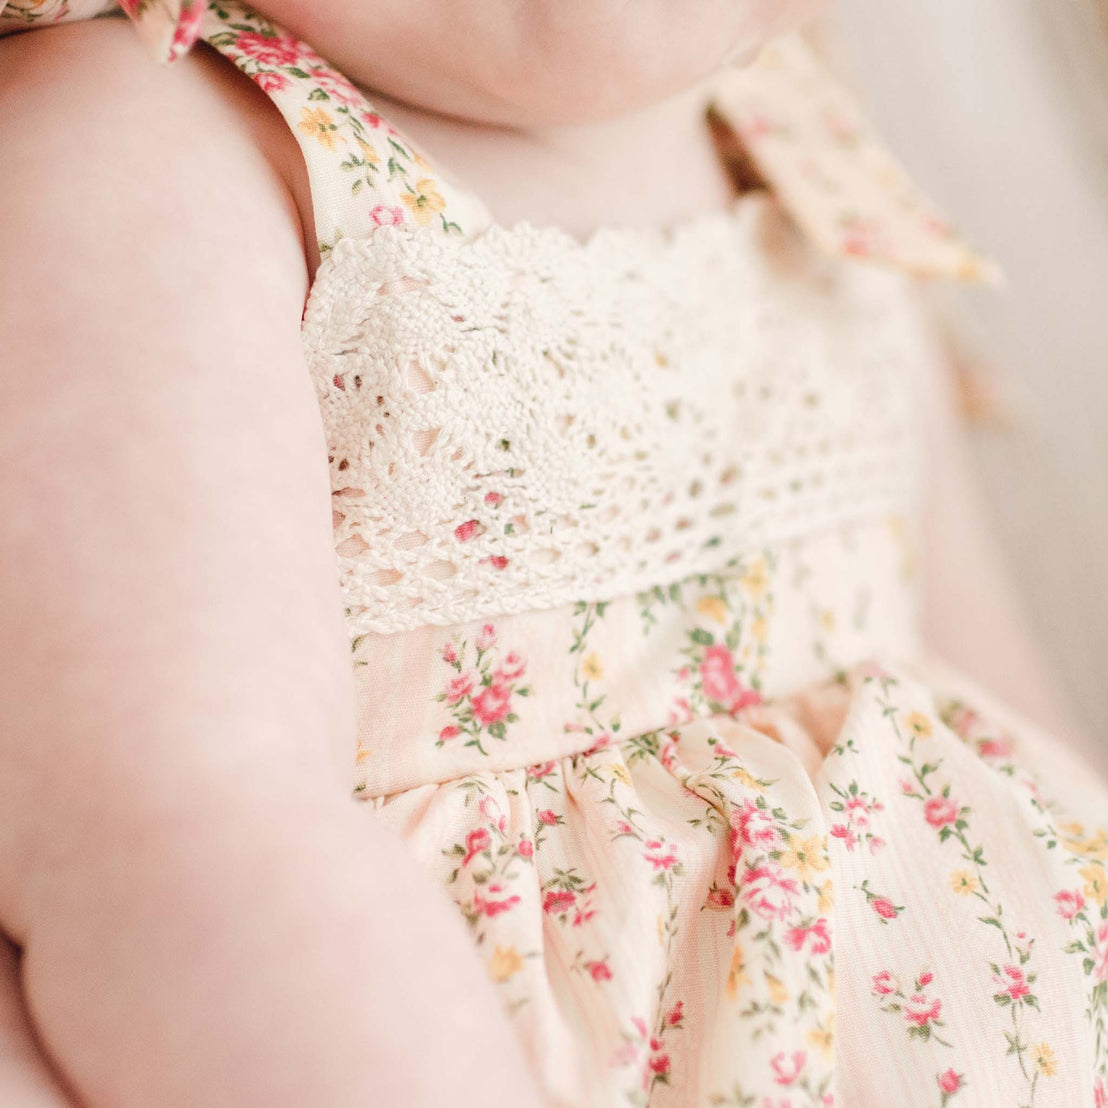 Detail of the Eloise Romper Dress in the color "Blush" and showcasing the natural toned lace trims.